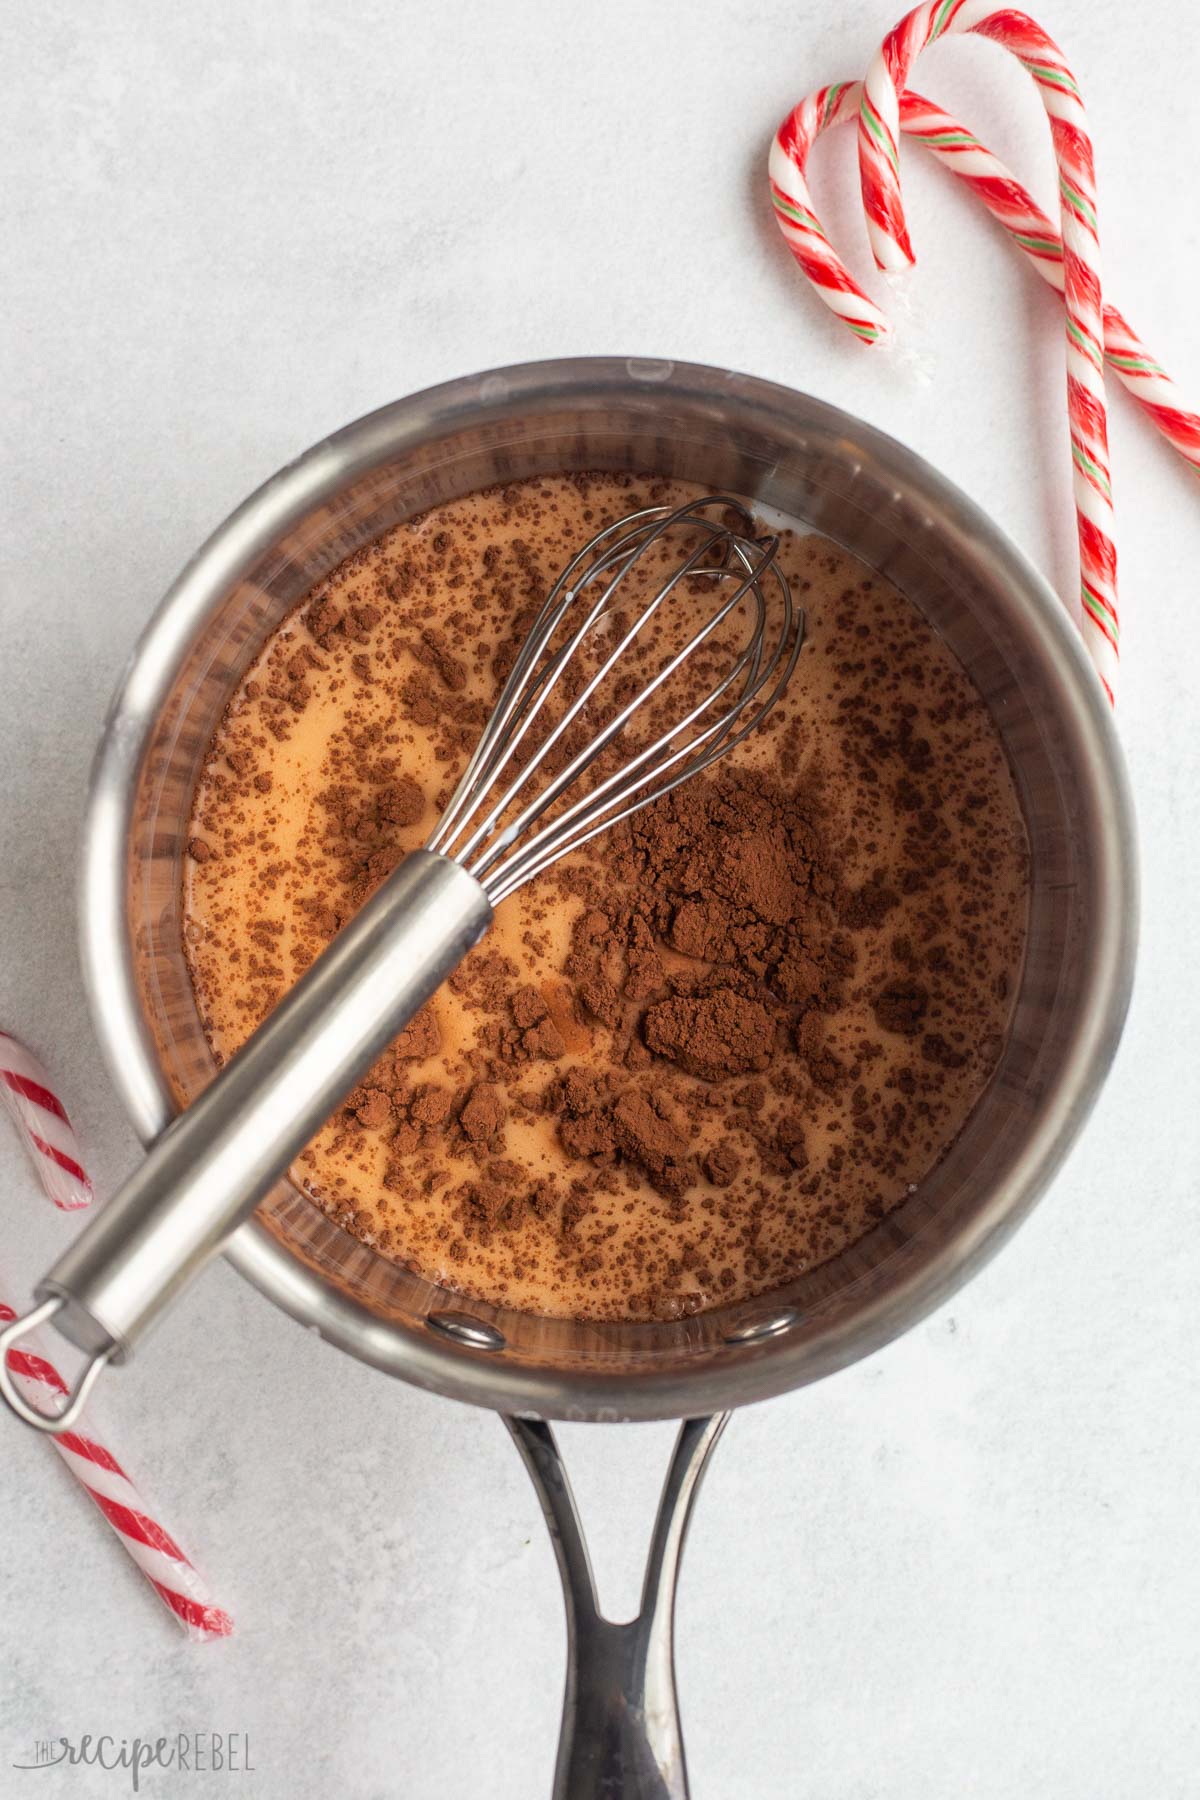 peppermint mocha ingredients added to saucepan.